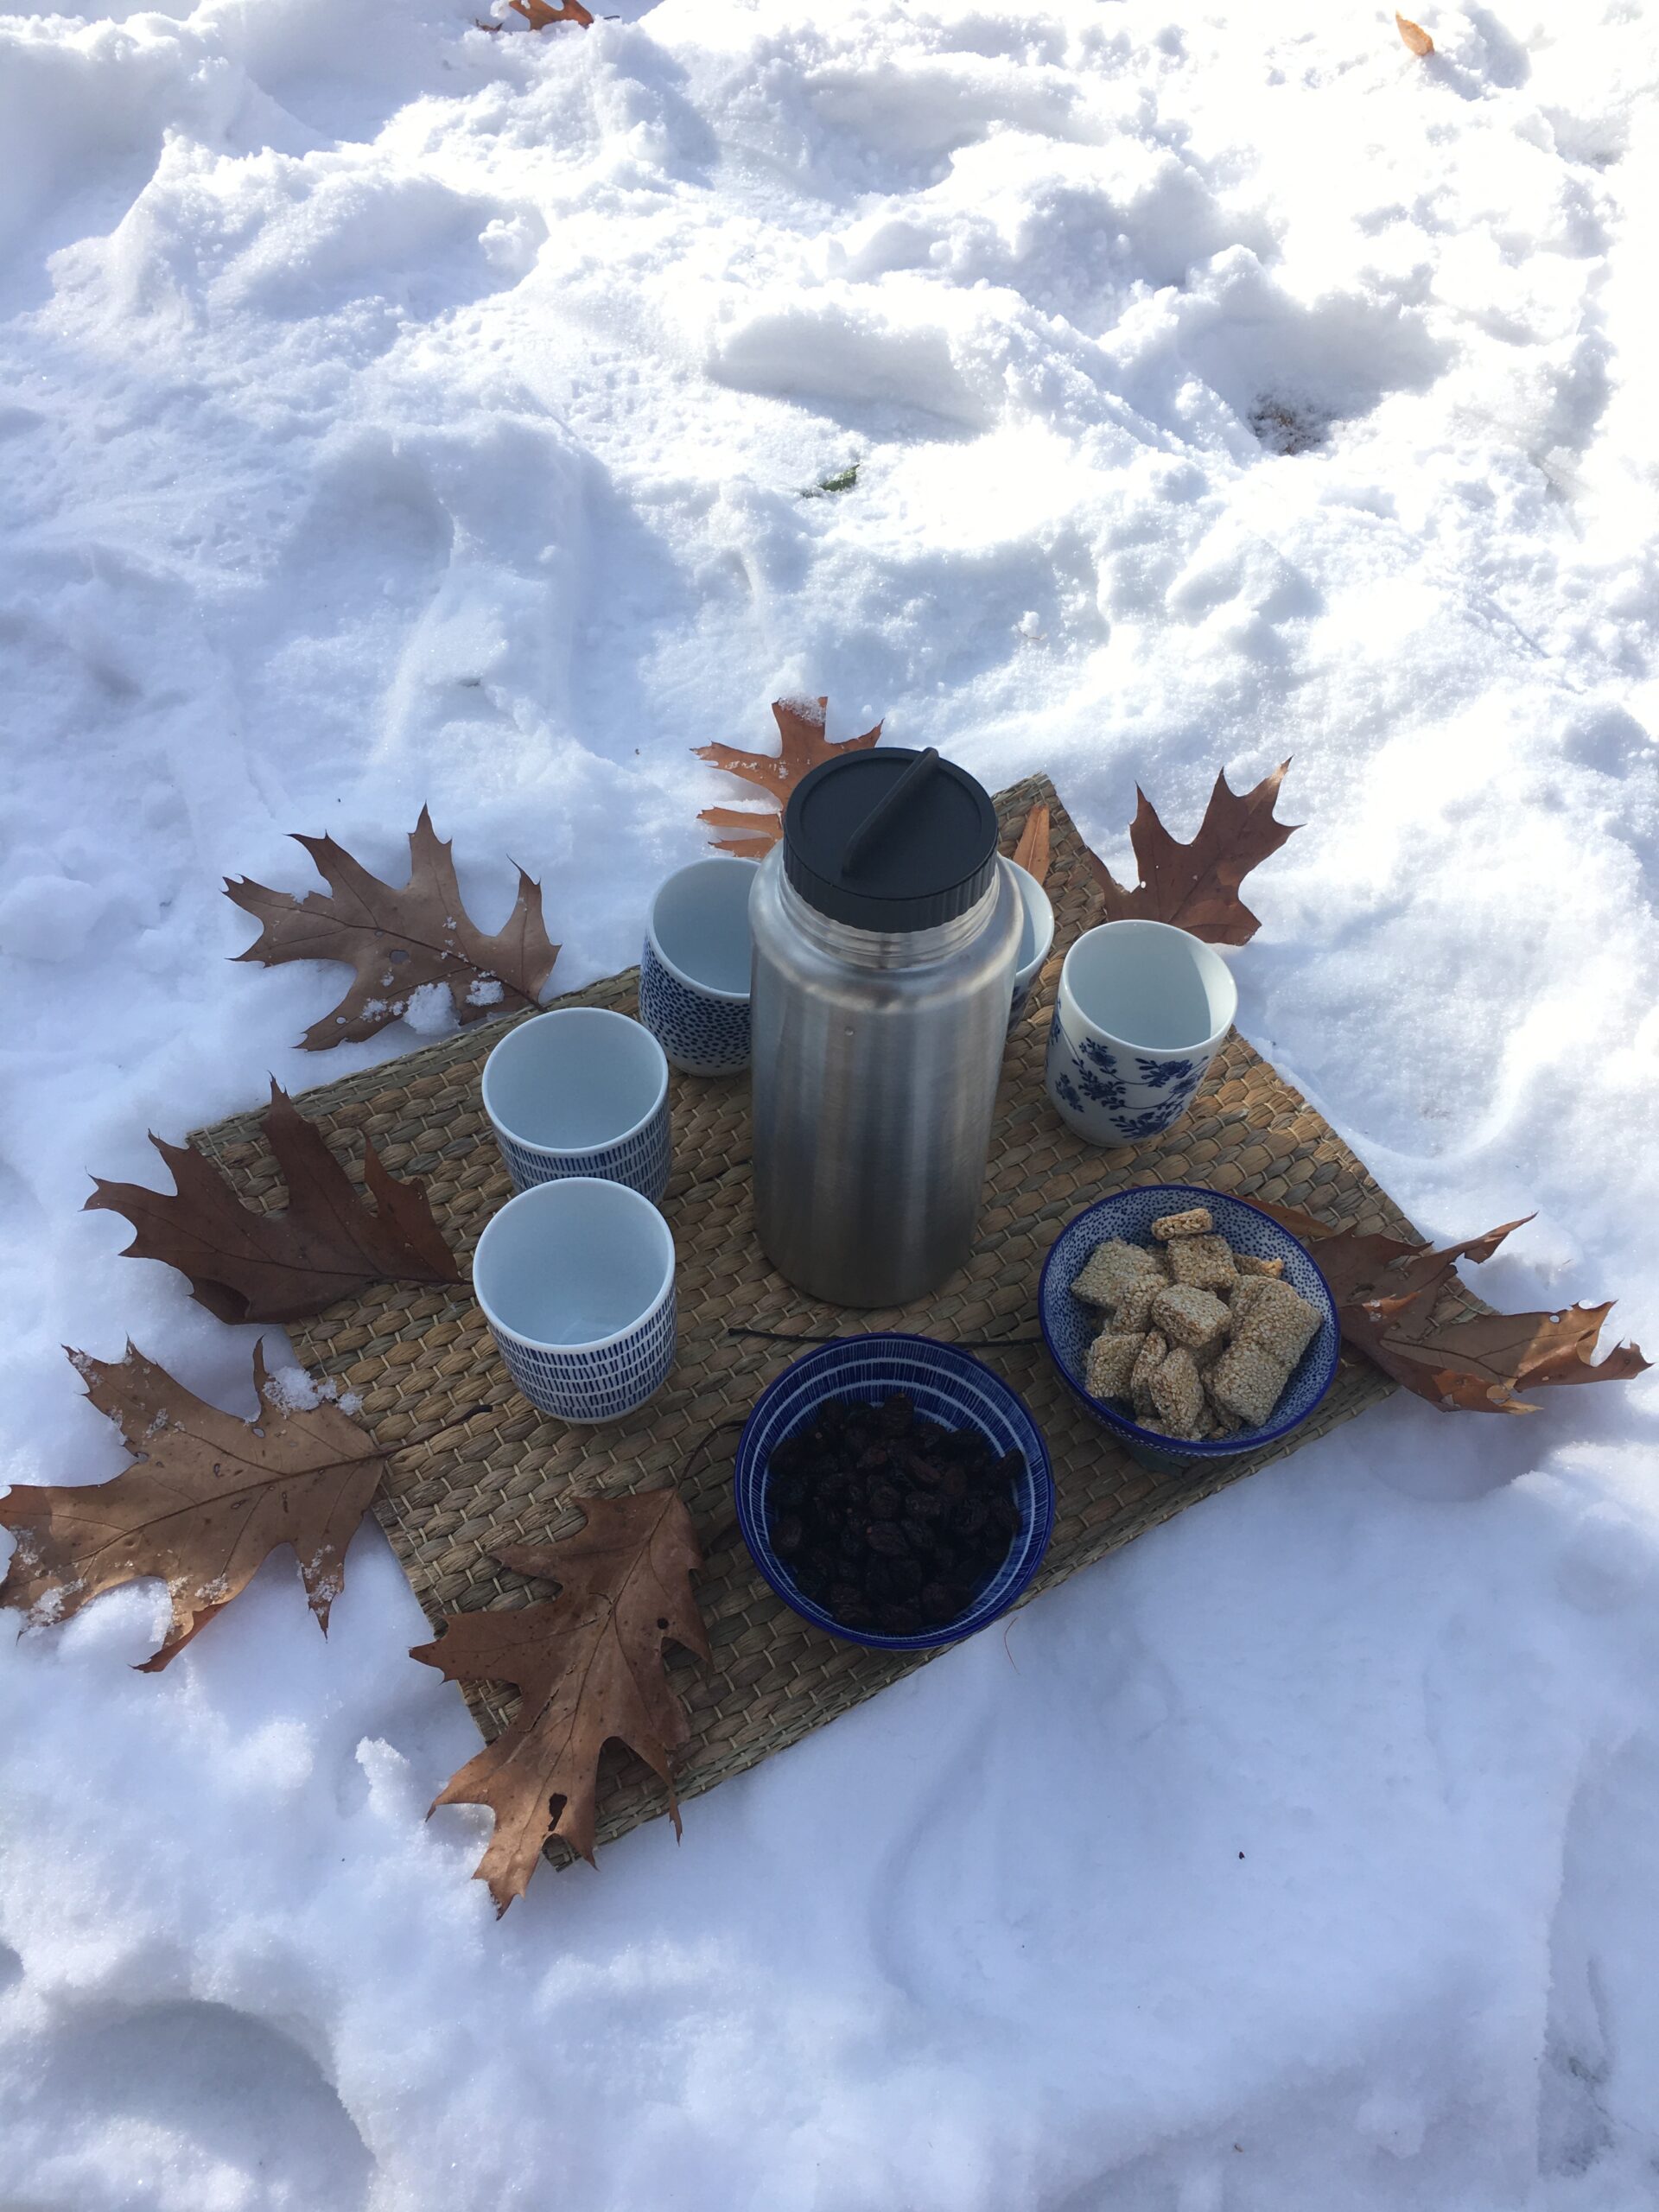 forest therapy tea including thermos of tea, cups, and snacks in bowls on a mat resting on a snowy forest floor, surrounded by oak leaves.